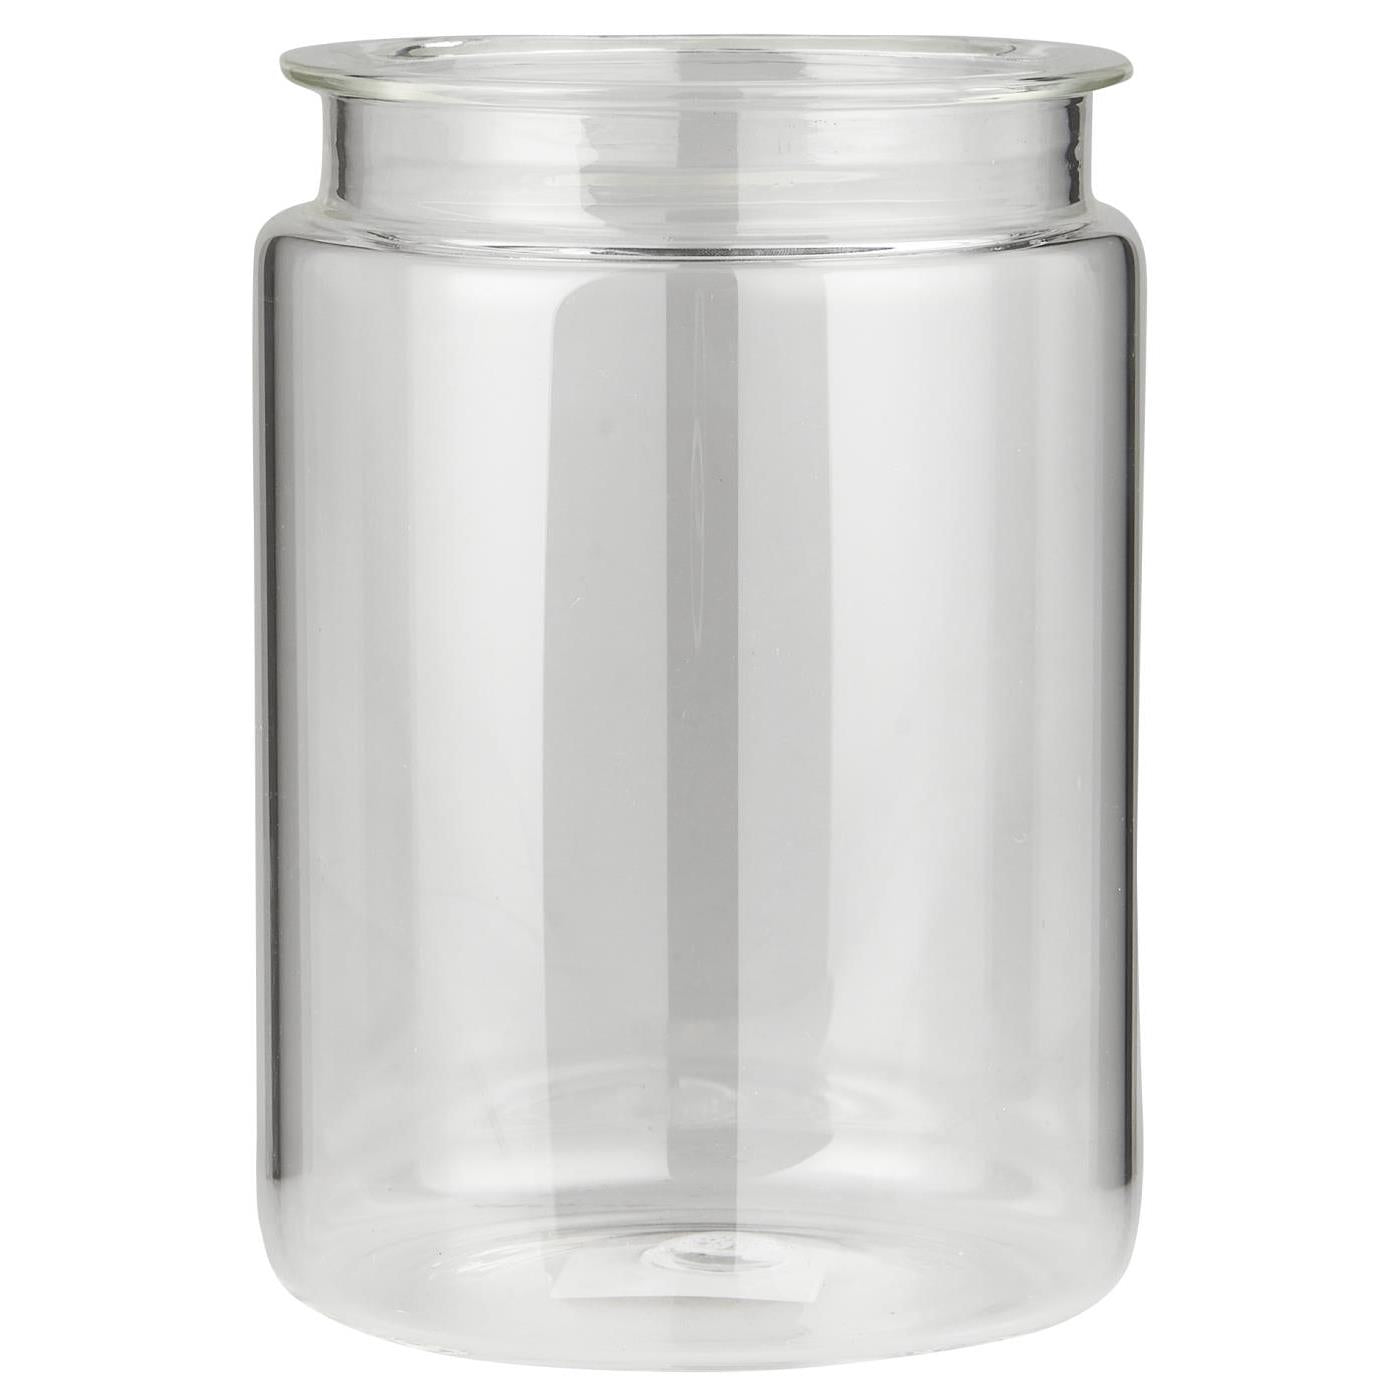 Clear Glass Vase for Medium sized Floral Bouquets - THE BRISTOL ARTISAN